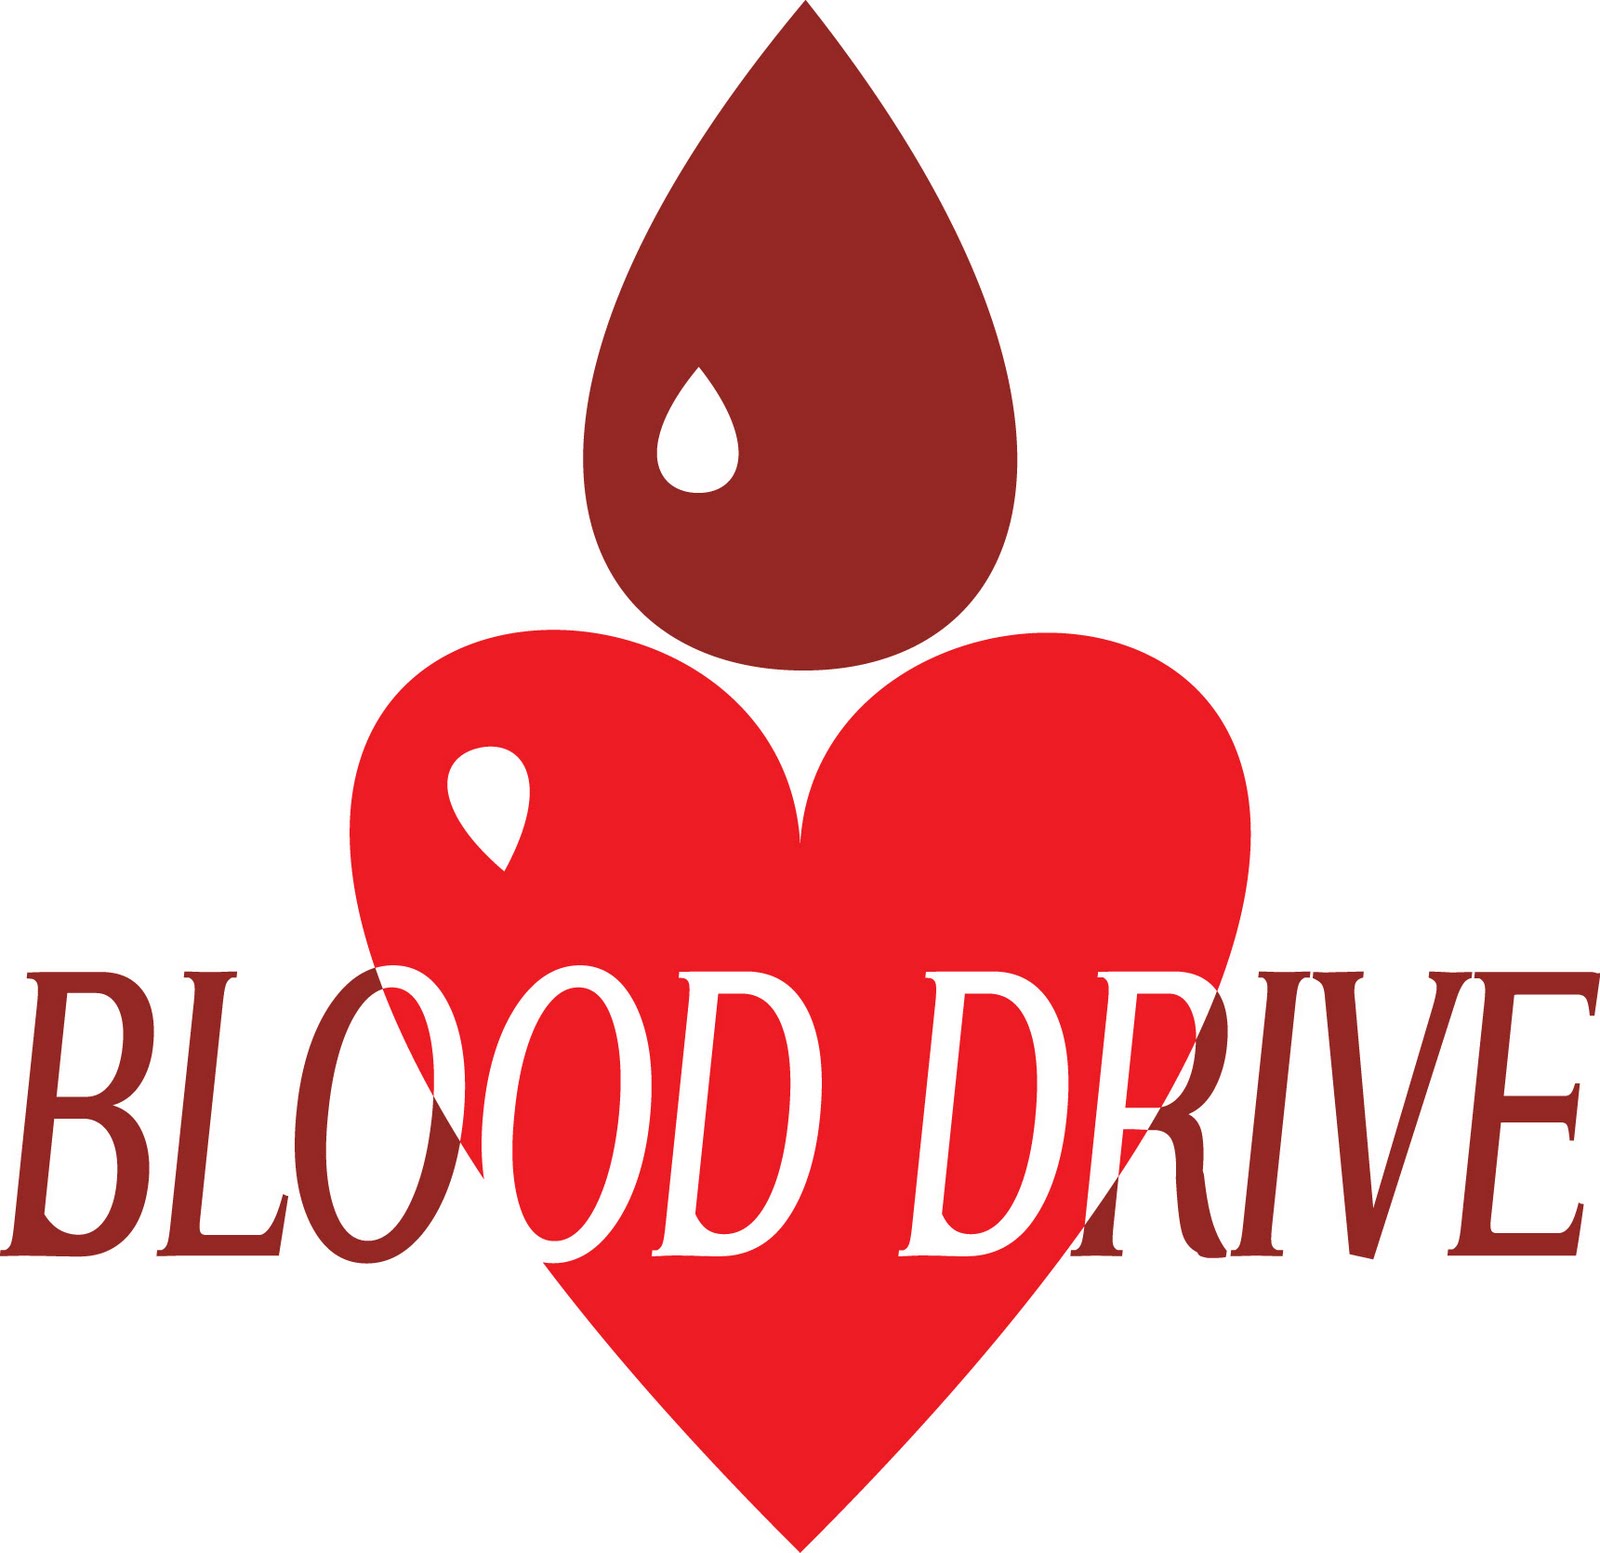 donate blood clipart free - photo #7